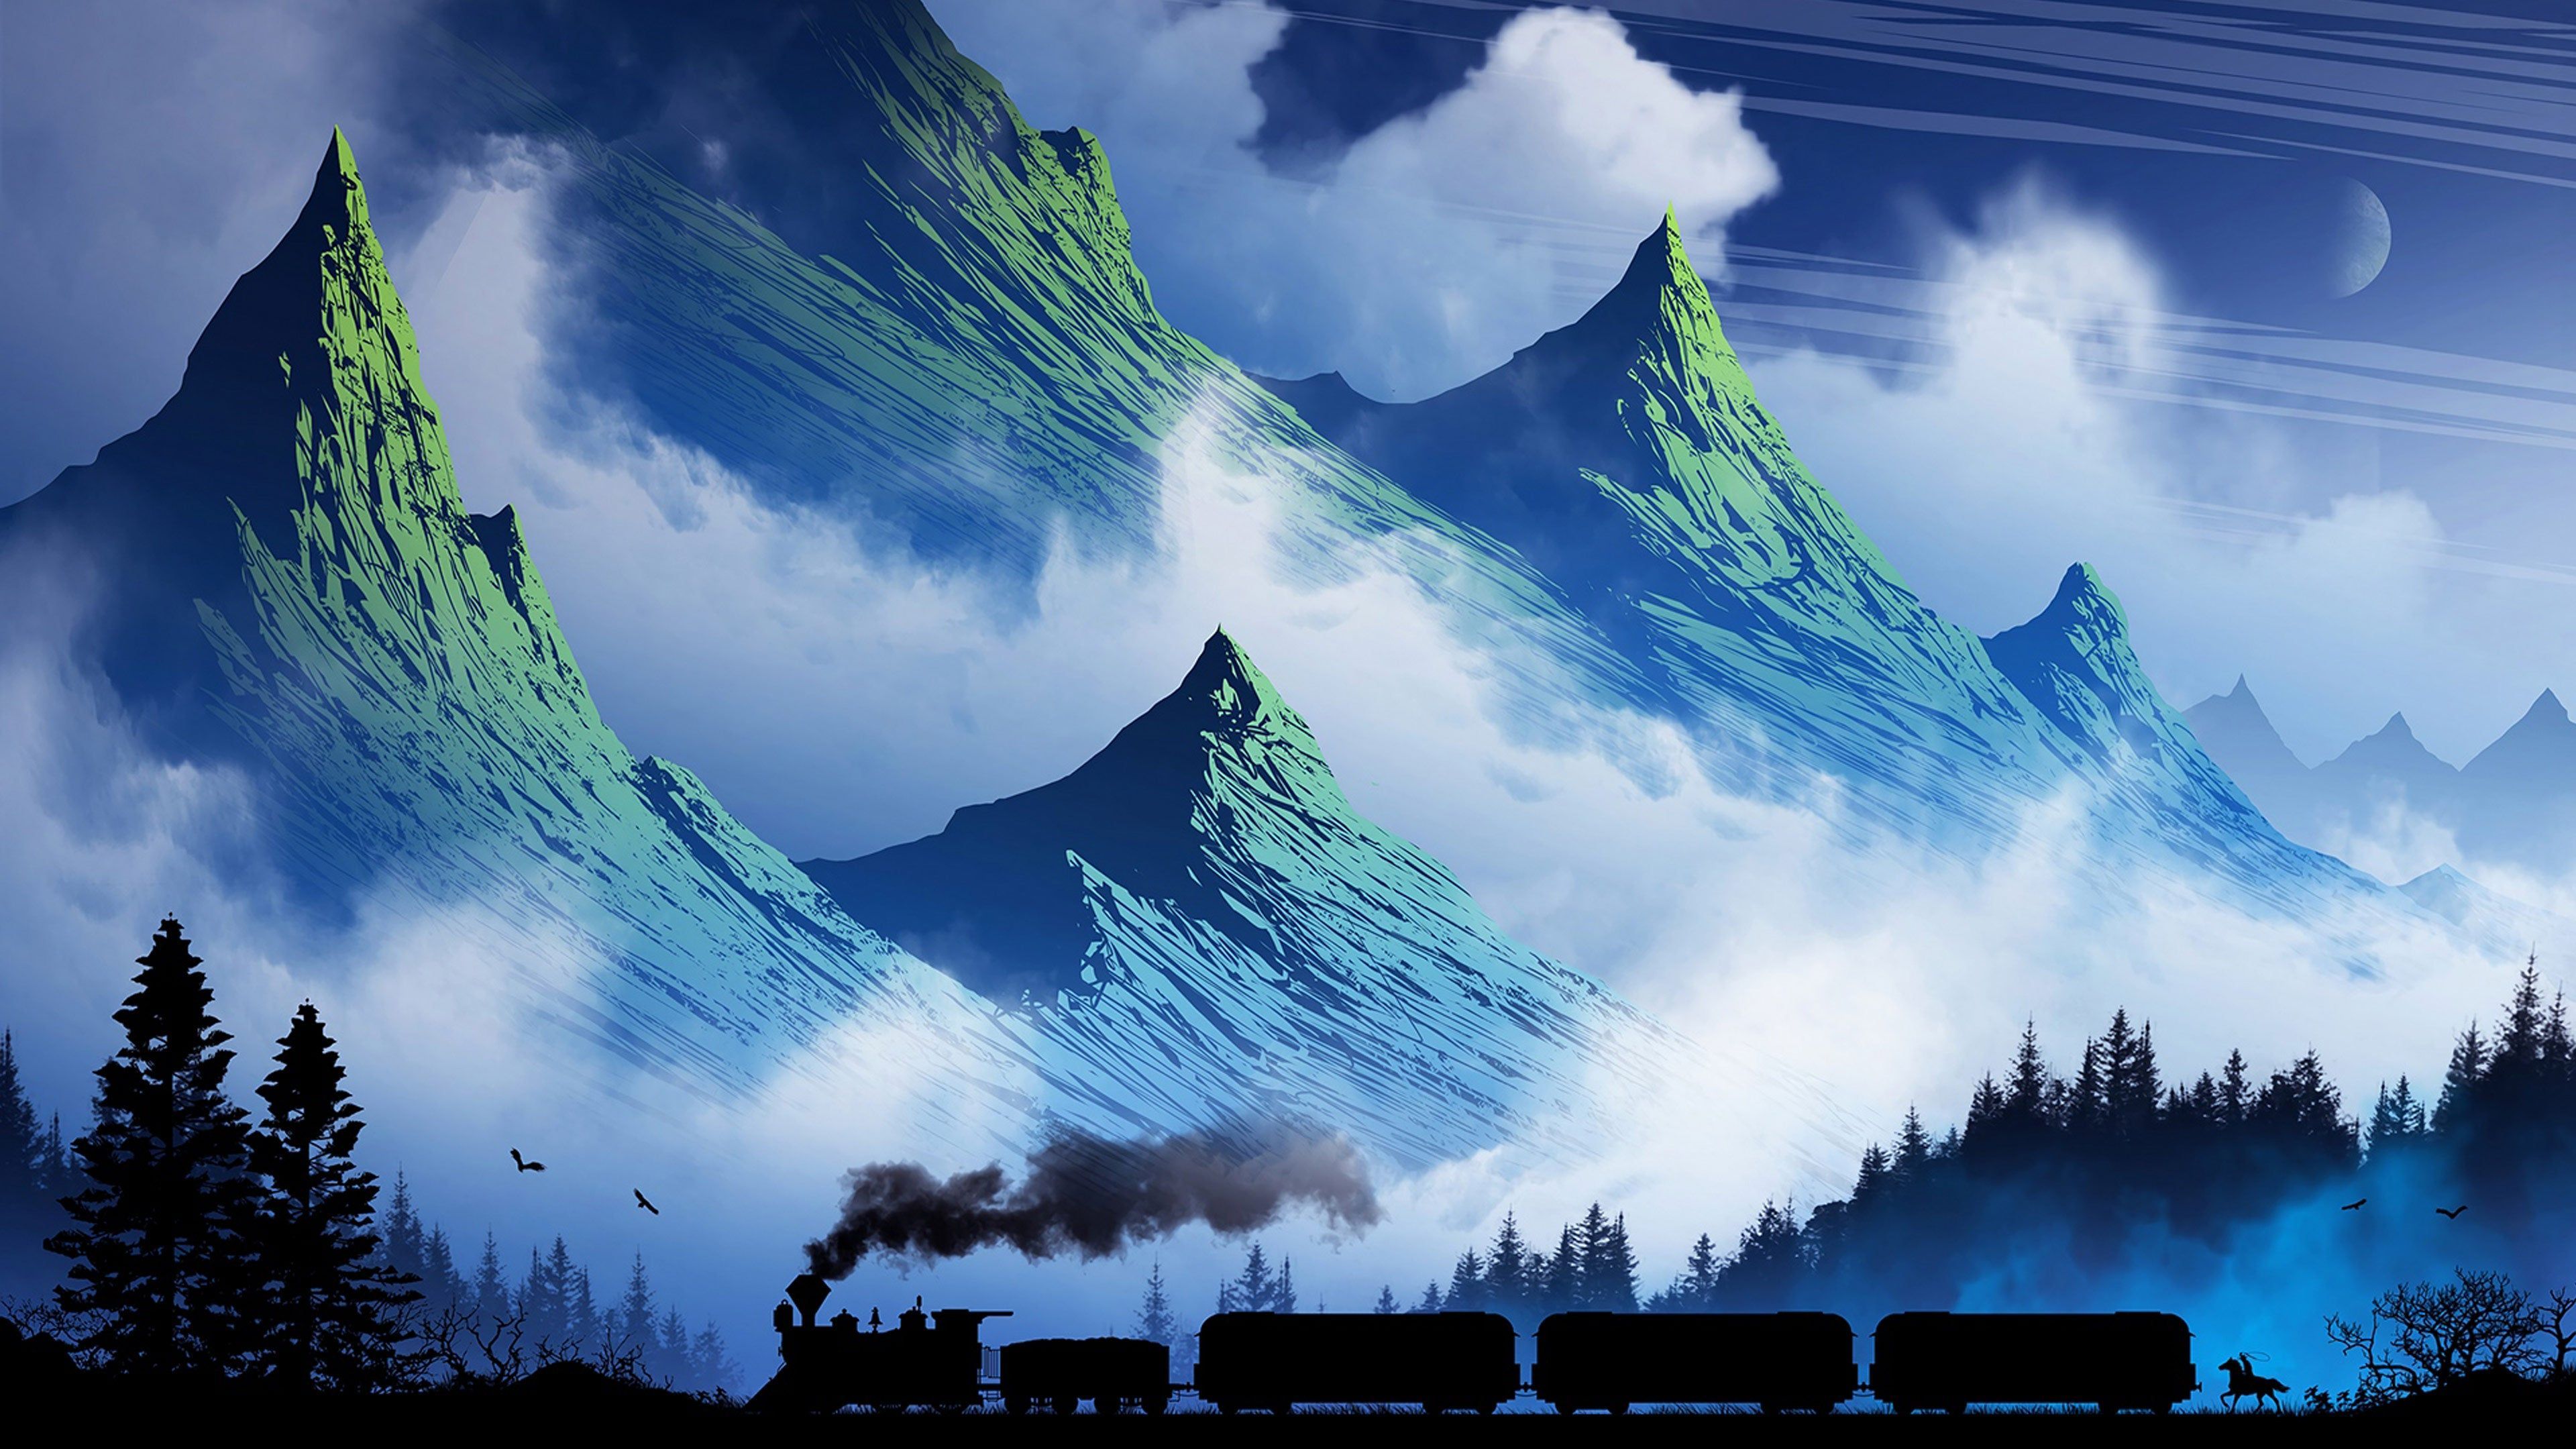 Mountain and Train Art 4K wallpaper. Cool background, Mountain art, Background